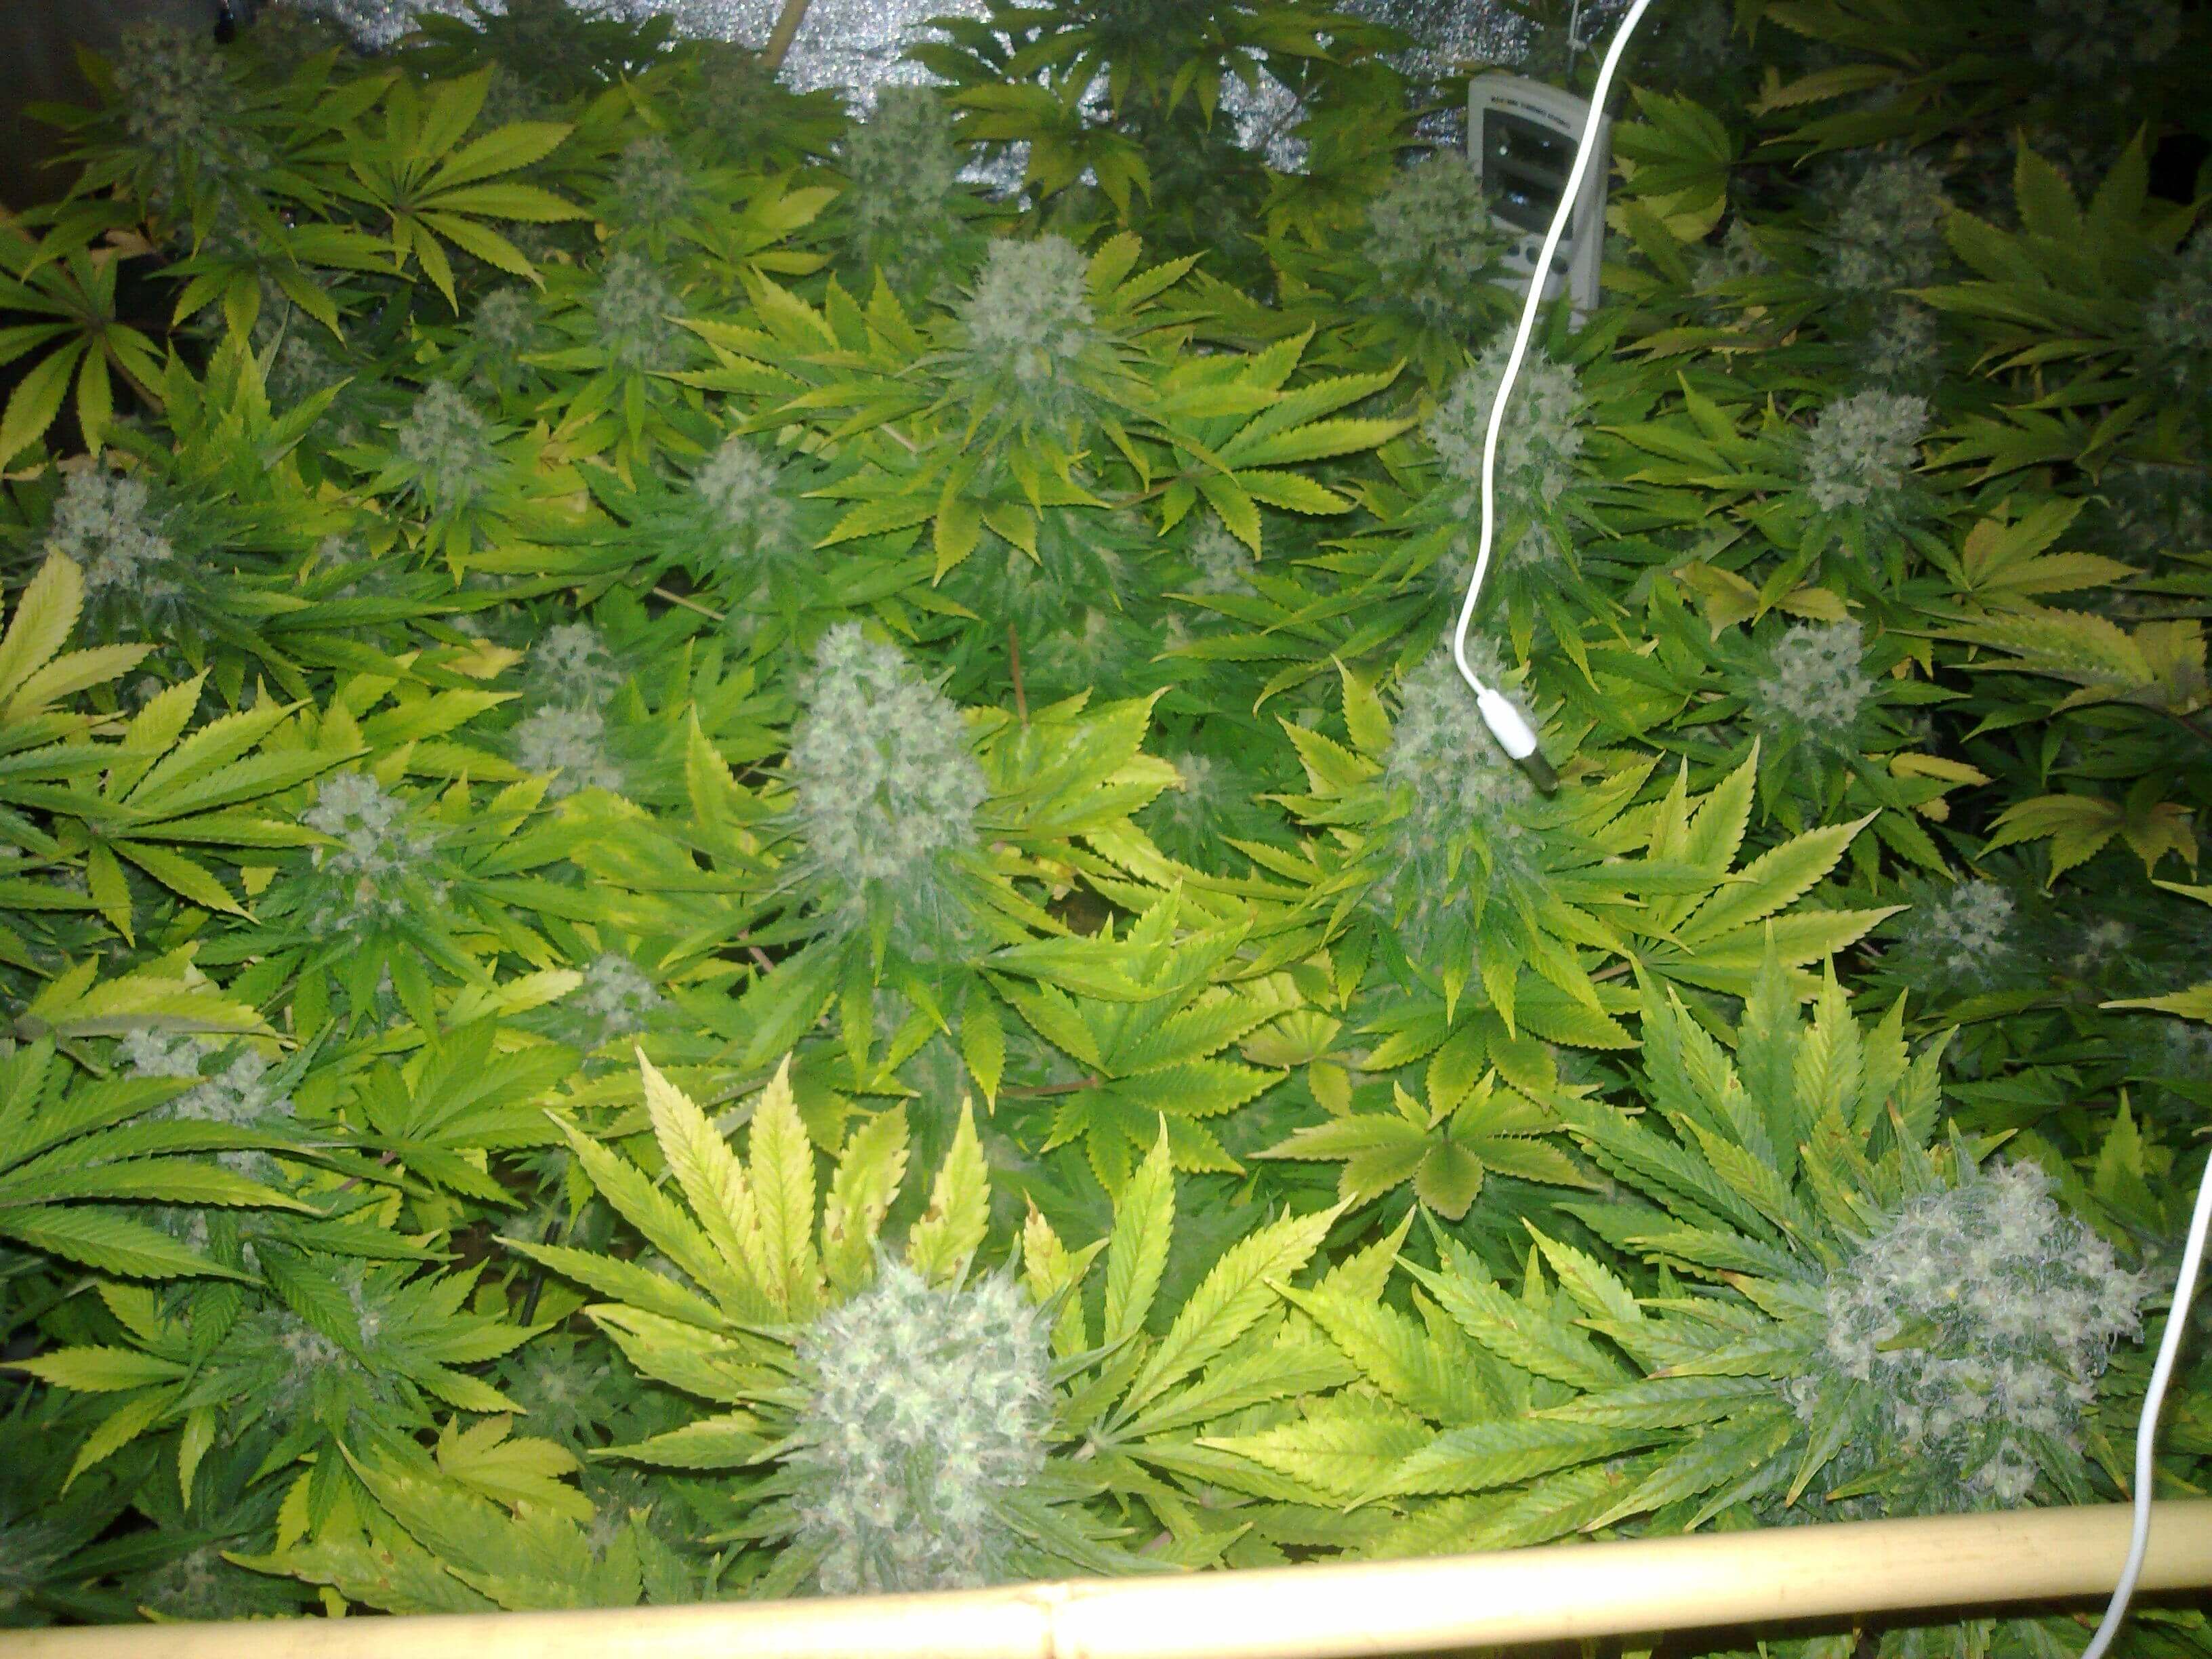 Electro conductivity and cannabis cultivation